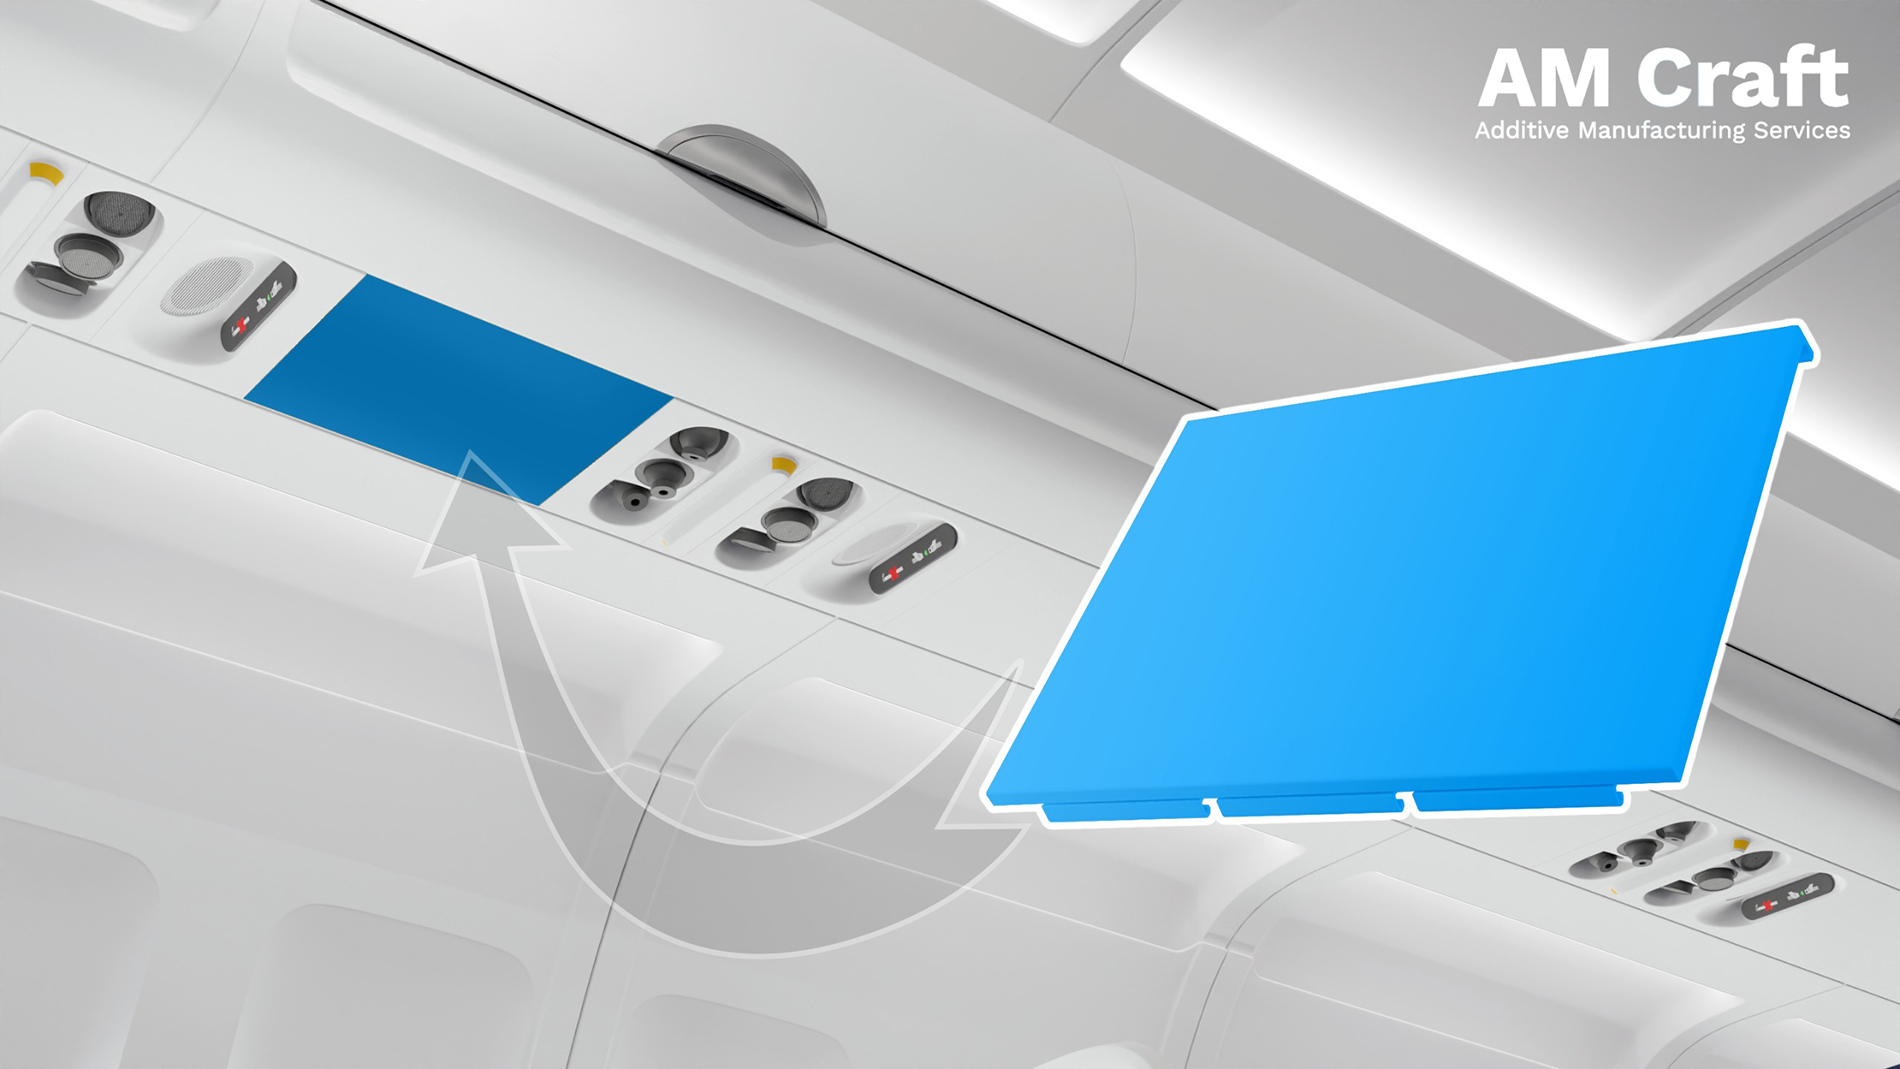 3D printed PSU in-fill panel installation within the aircraft cabin interior. Image: AM Craft